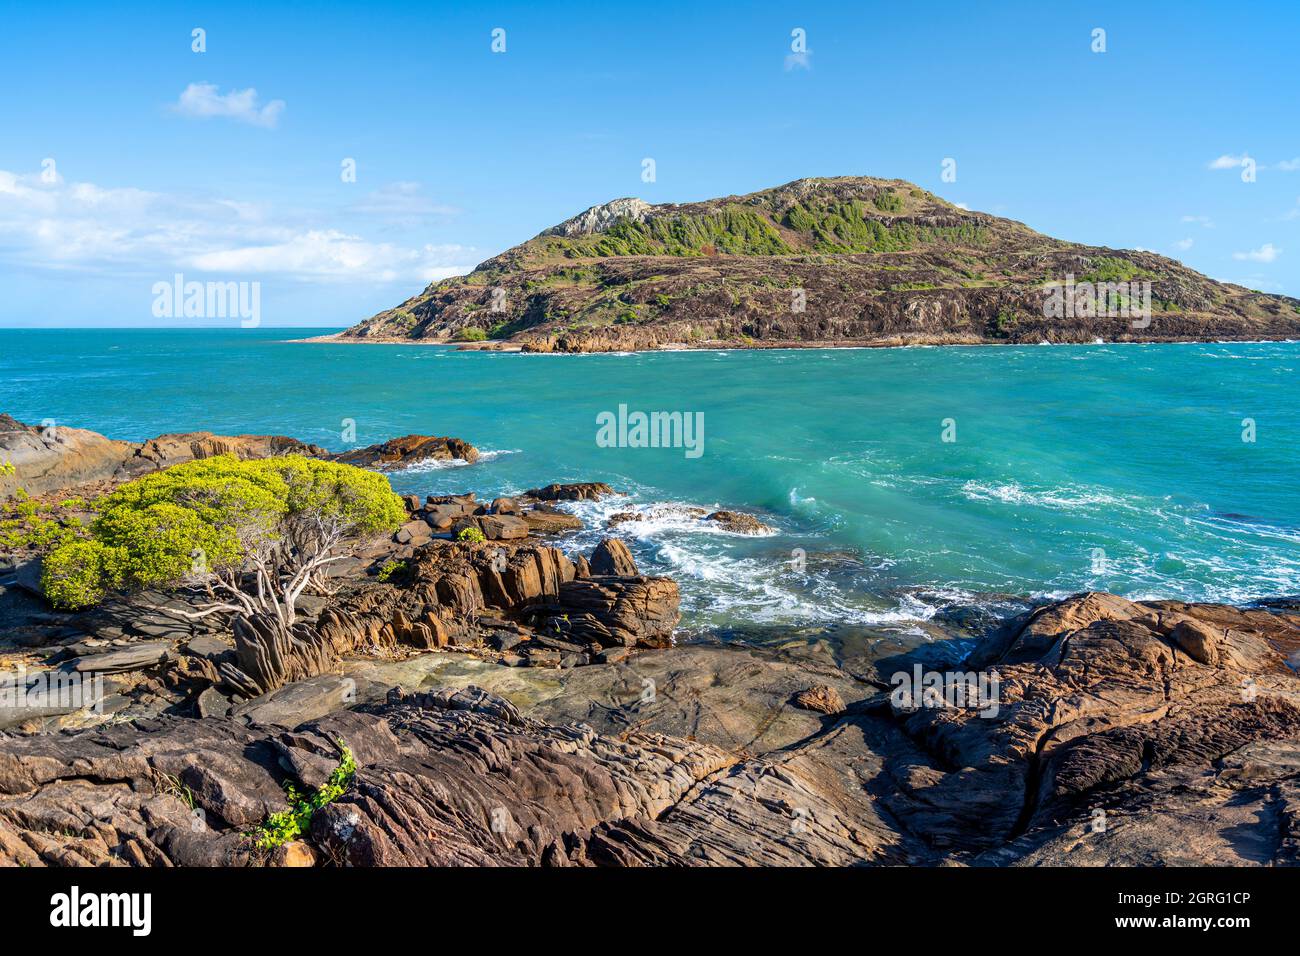 View of York Island and Torres Straits from The Tip walking track, Cape York Peninsula, Far North Queensland Australia Stock Photo